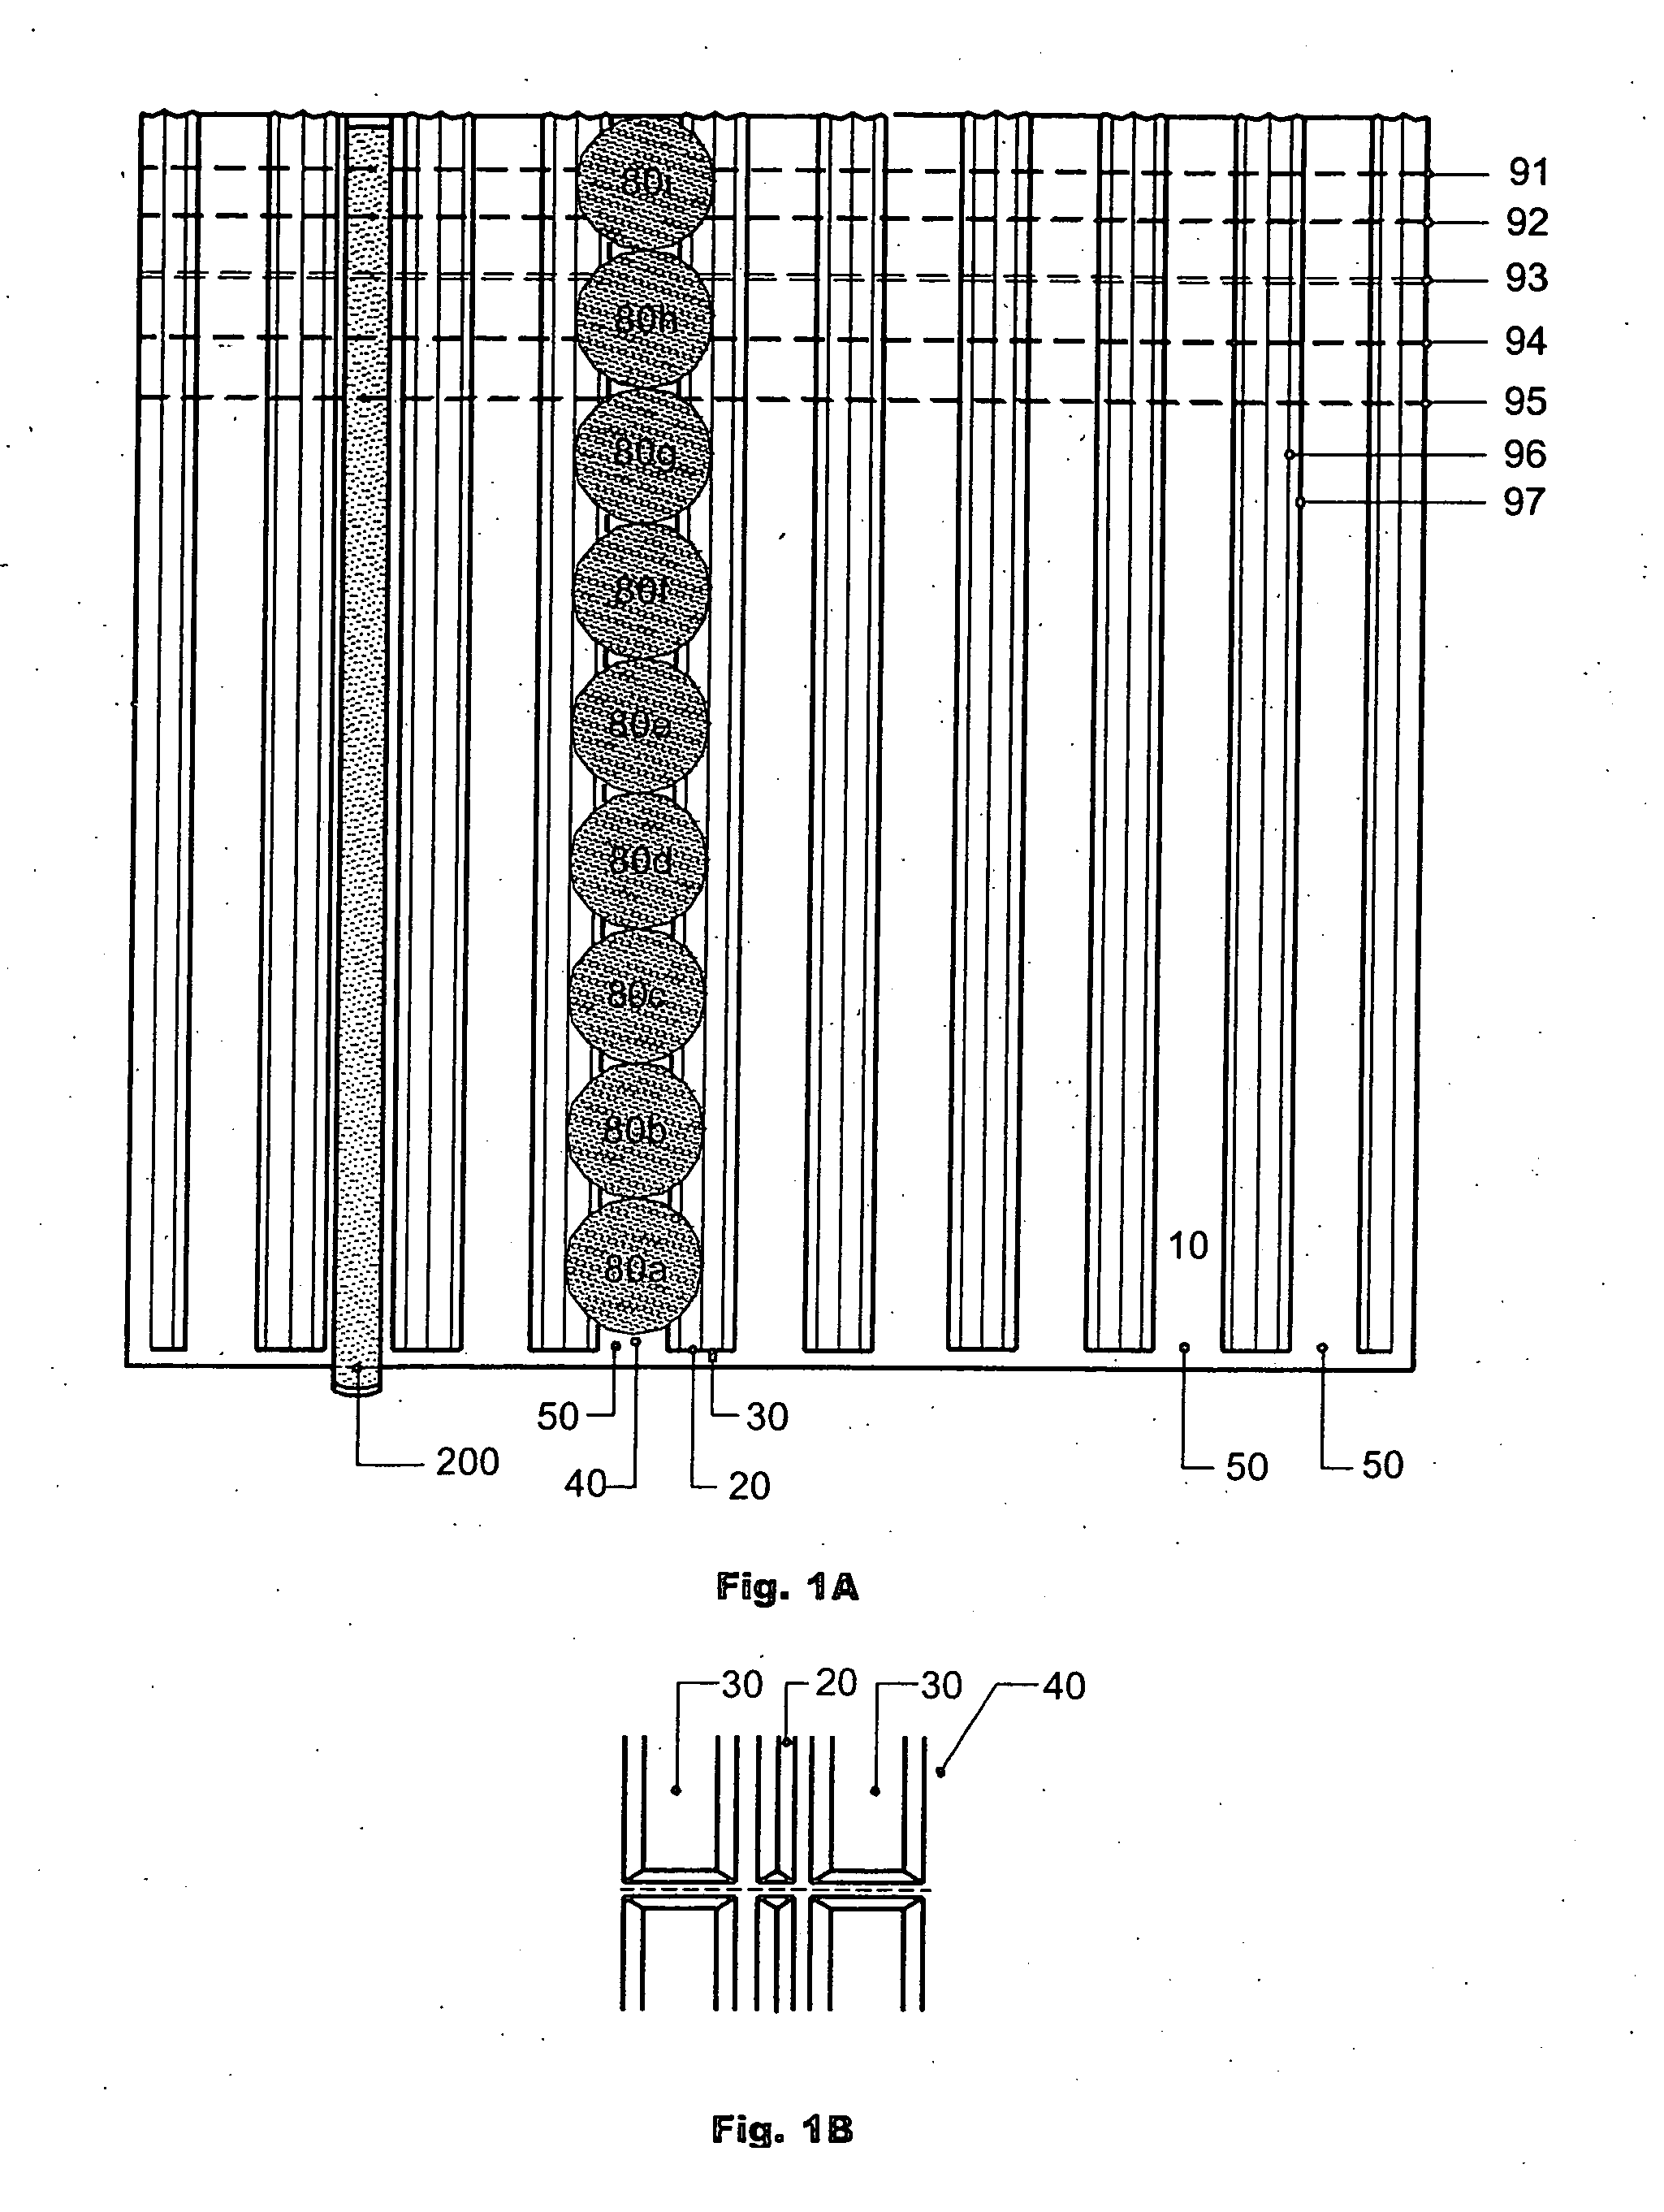 System and method for product display, arrangement and rotation